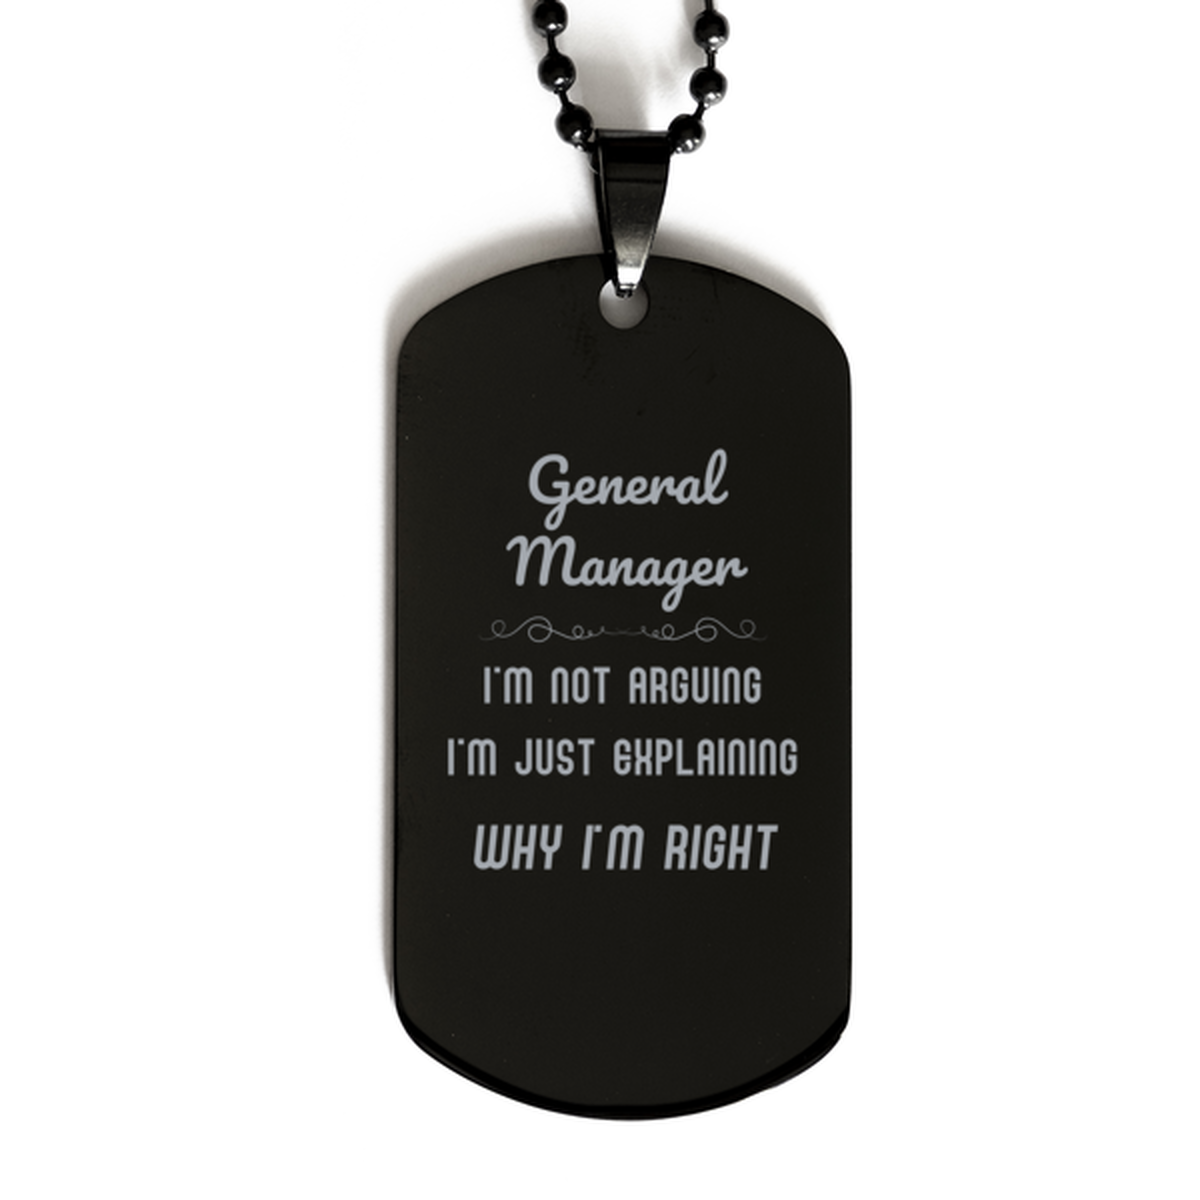 General Manager I'm not Arguing. I'm Just Explaining Why I'm RIGHT Black Dog Tag, Funny Saying Quote General Manager Gifts For General Manager Graduation Birthday Christmas Gifts for Men Women Coworker